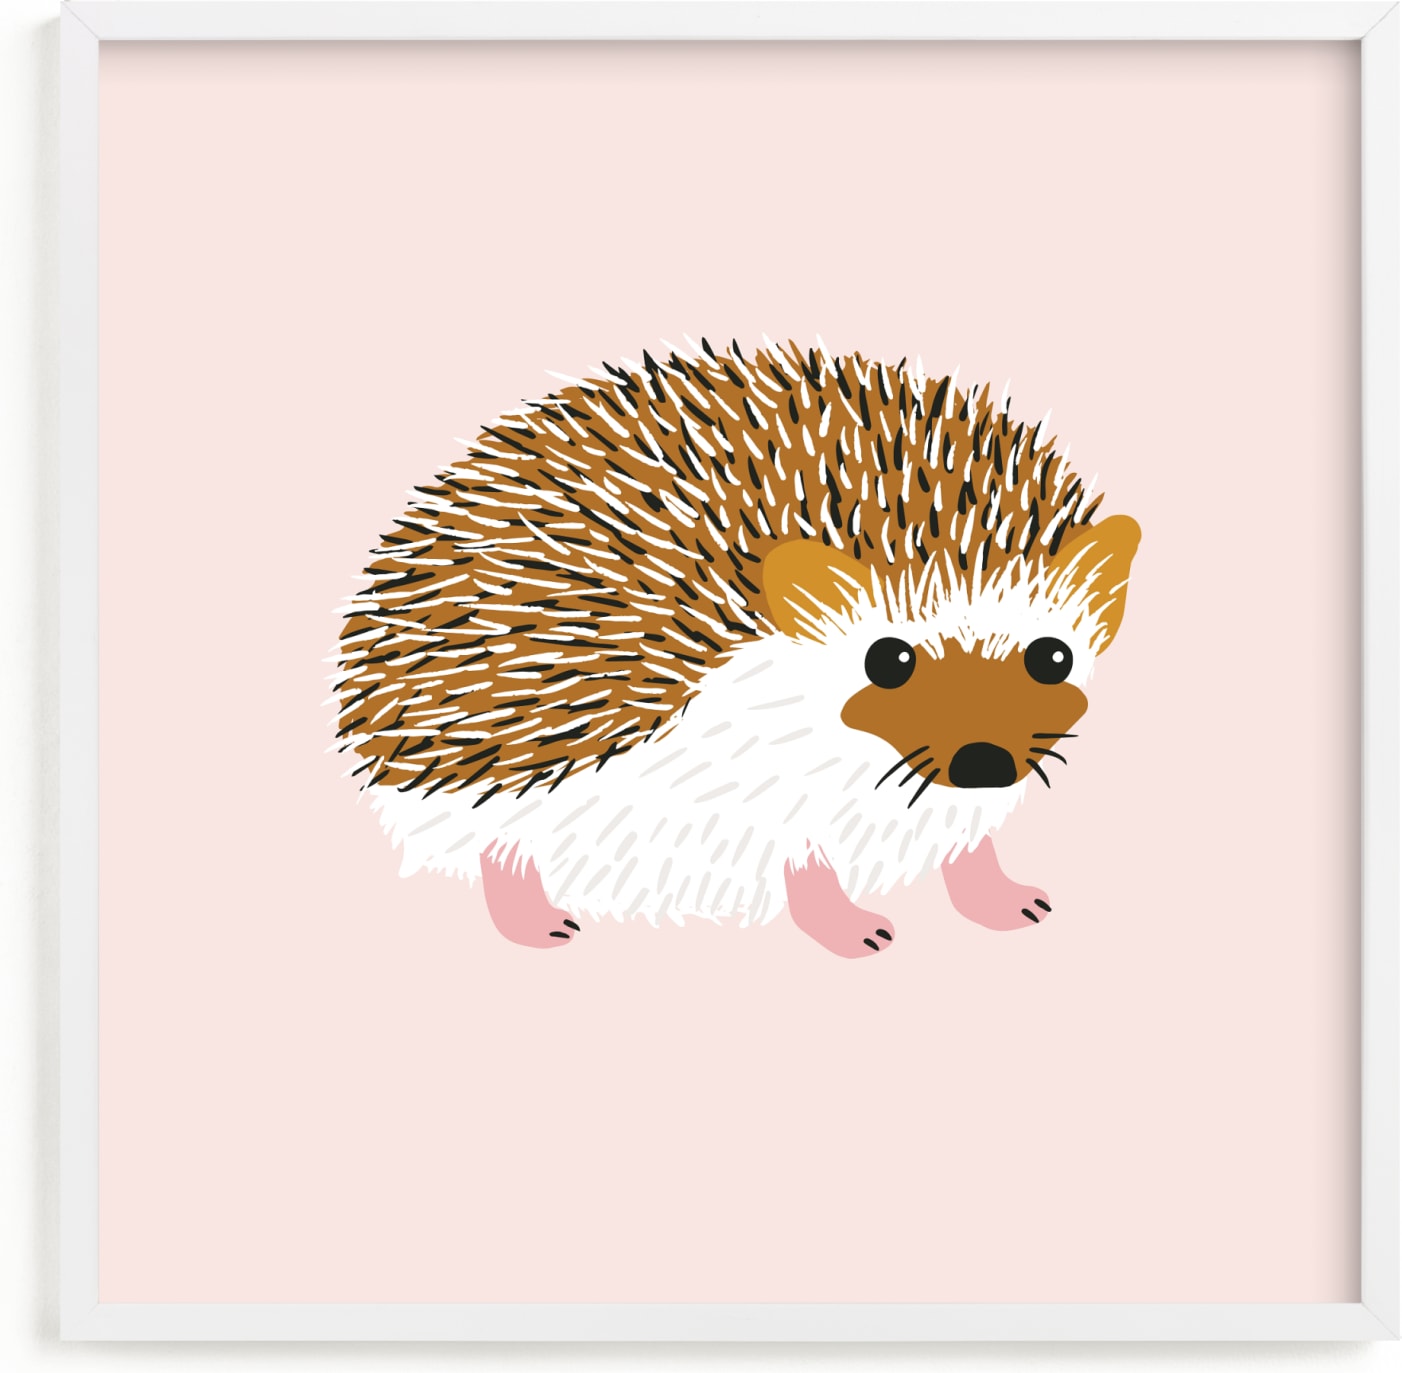 This is a brown kids wall art by Genna Blackburn called Little Hedgehog.